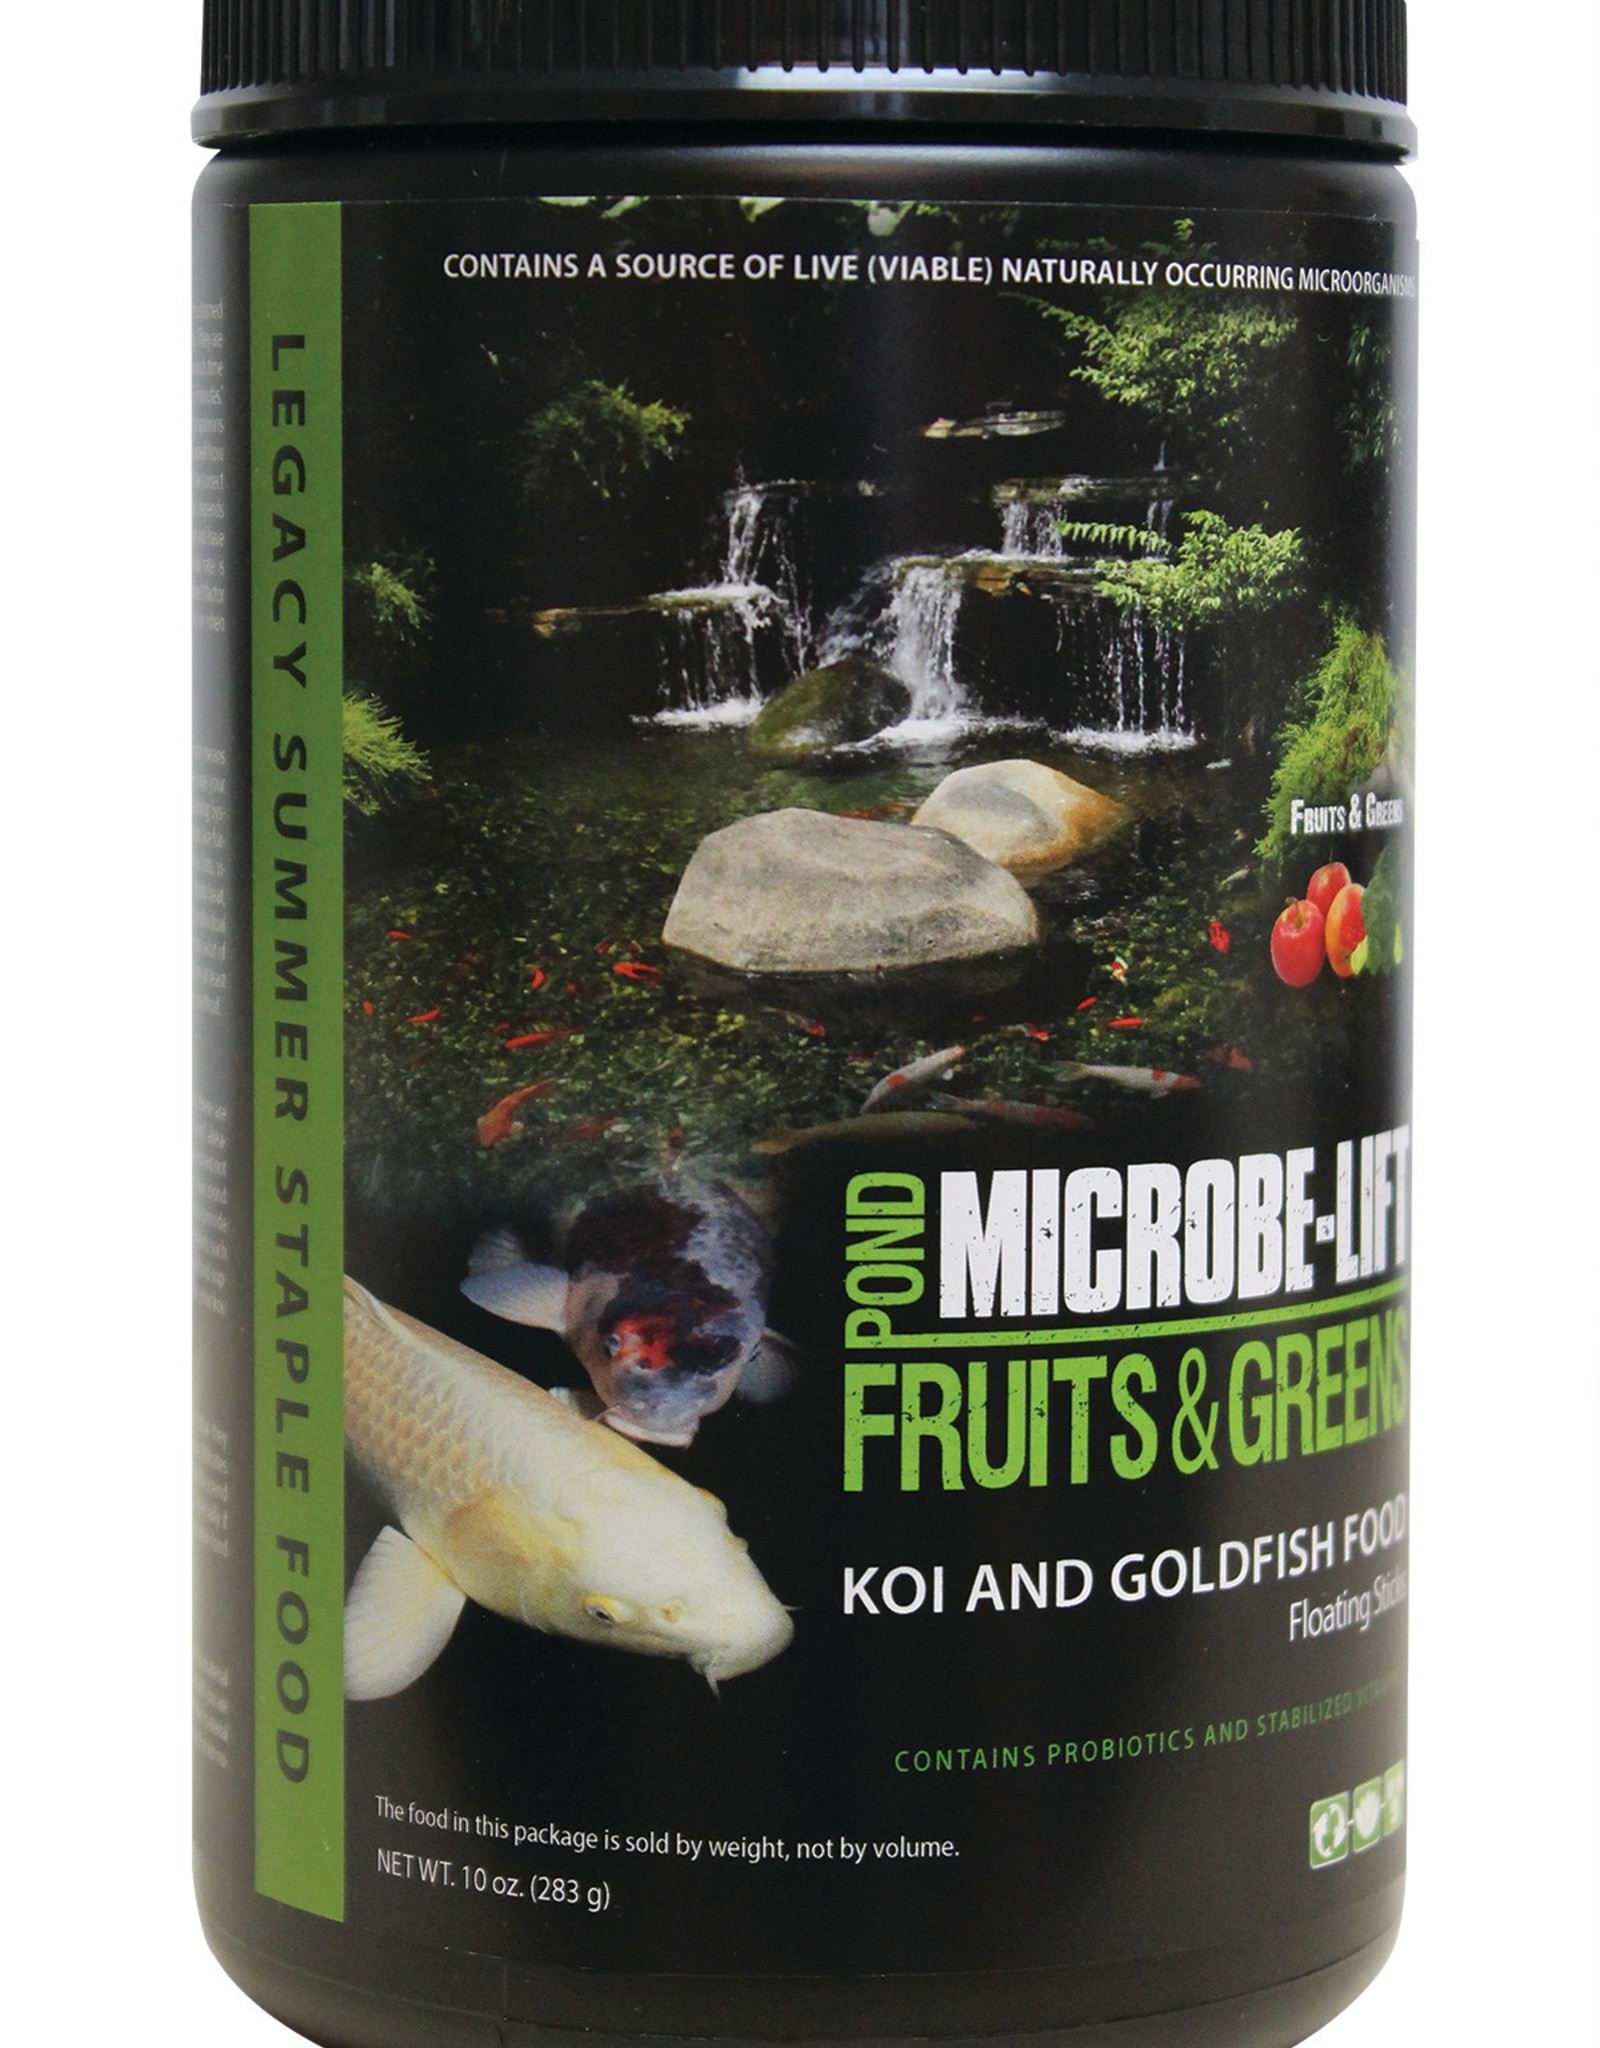 ECOLOGICAL LABS MICROBE LIFT FRUITS & GREENS 10 OZ